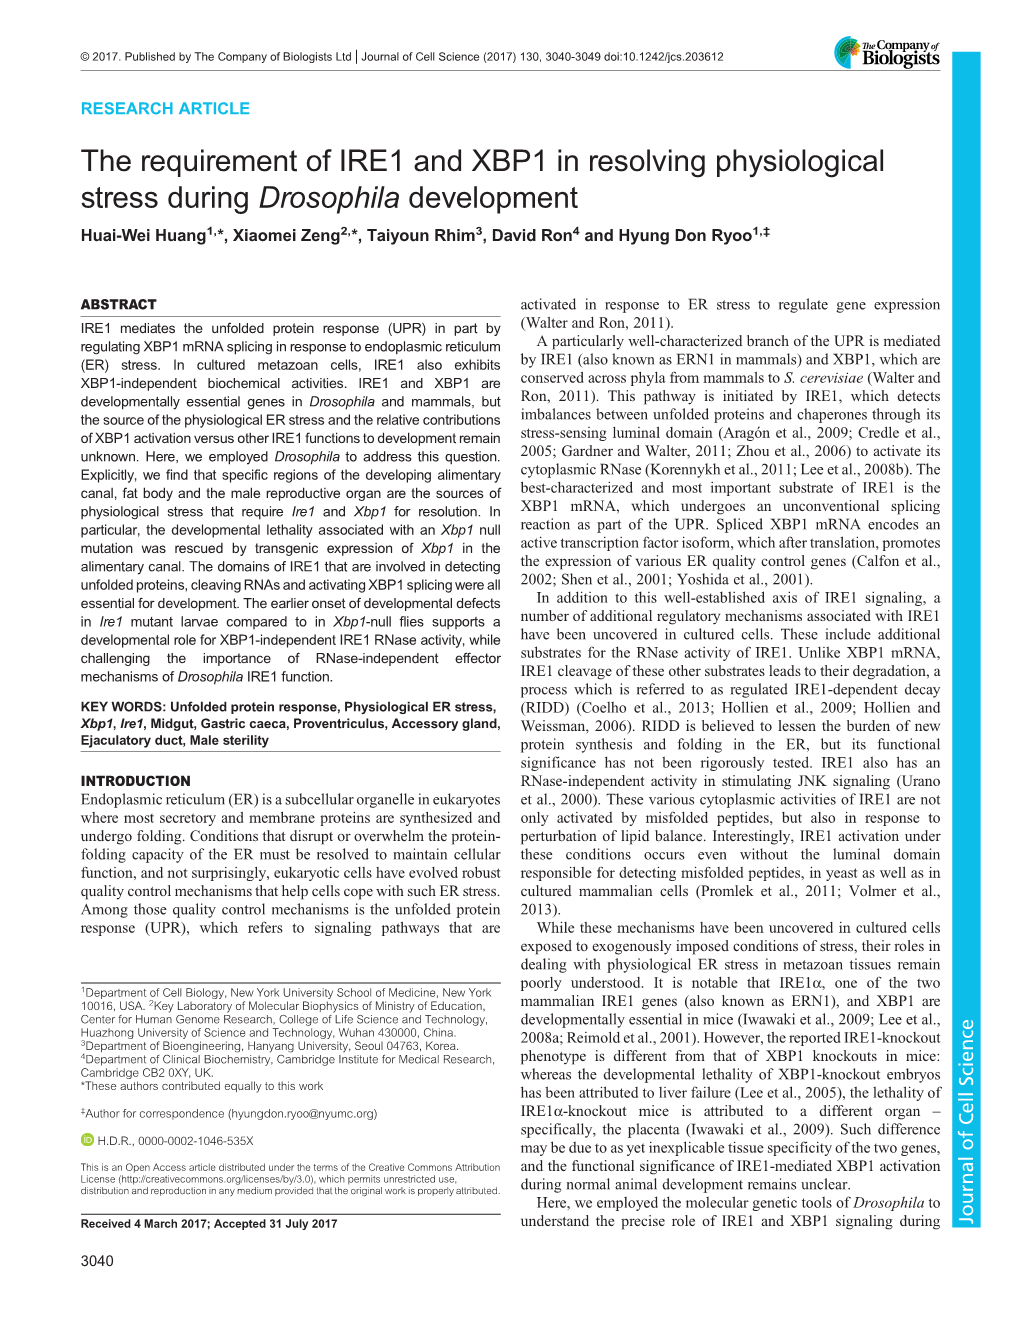 The Requirement of IRE1 and XBP1 in Resolving Physiological Stress